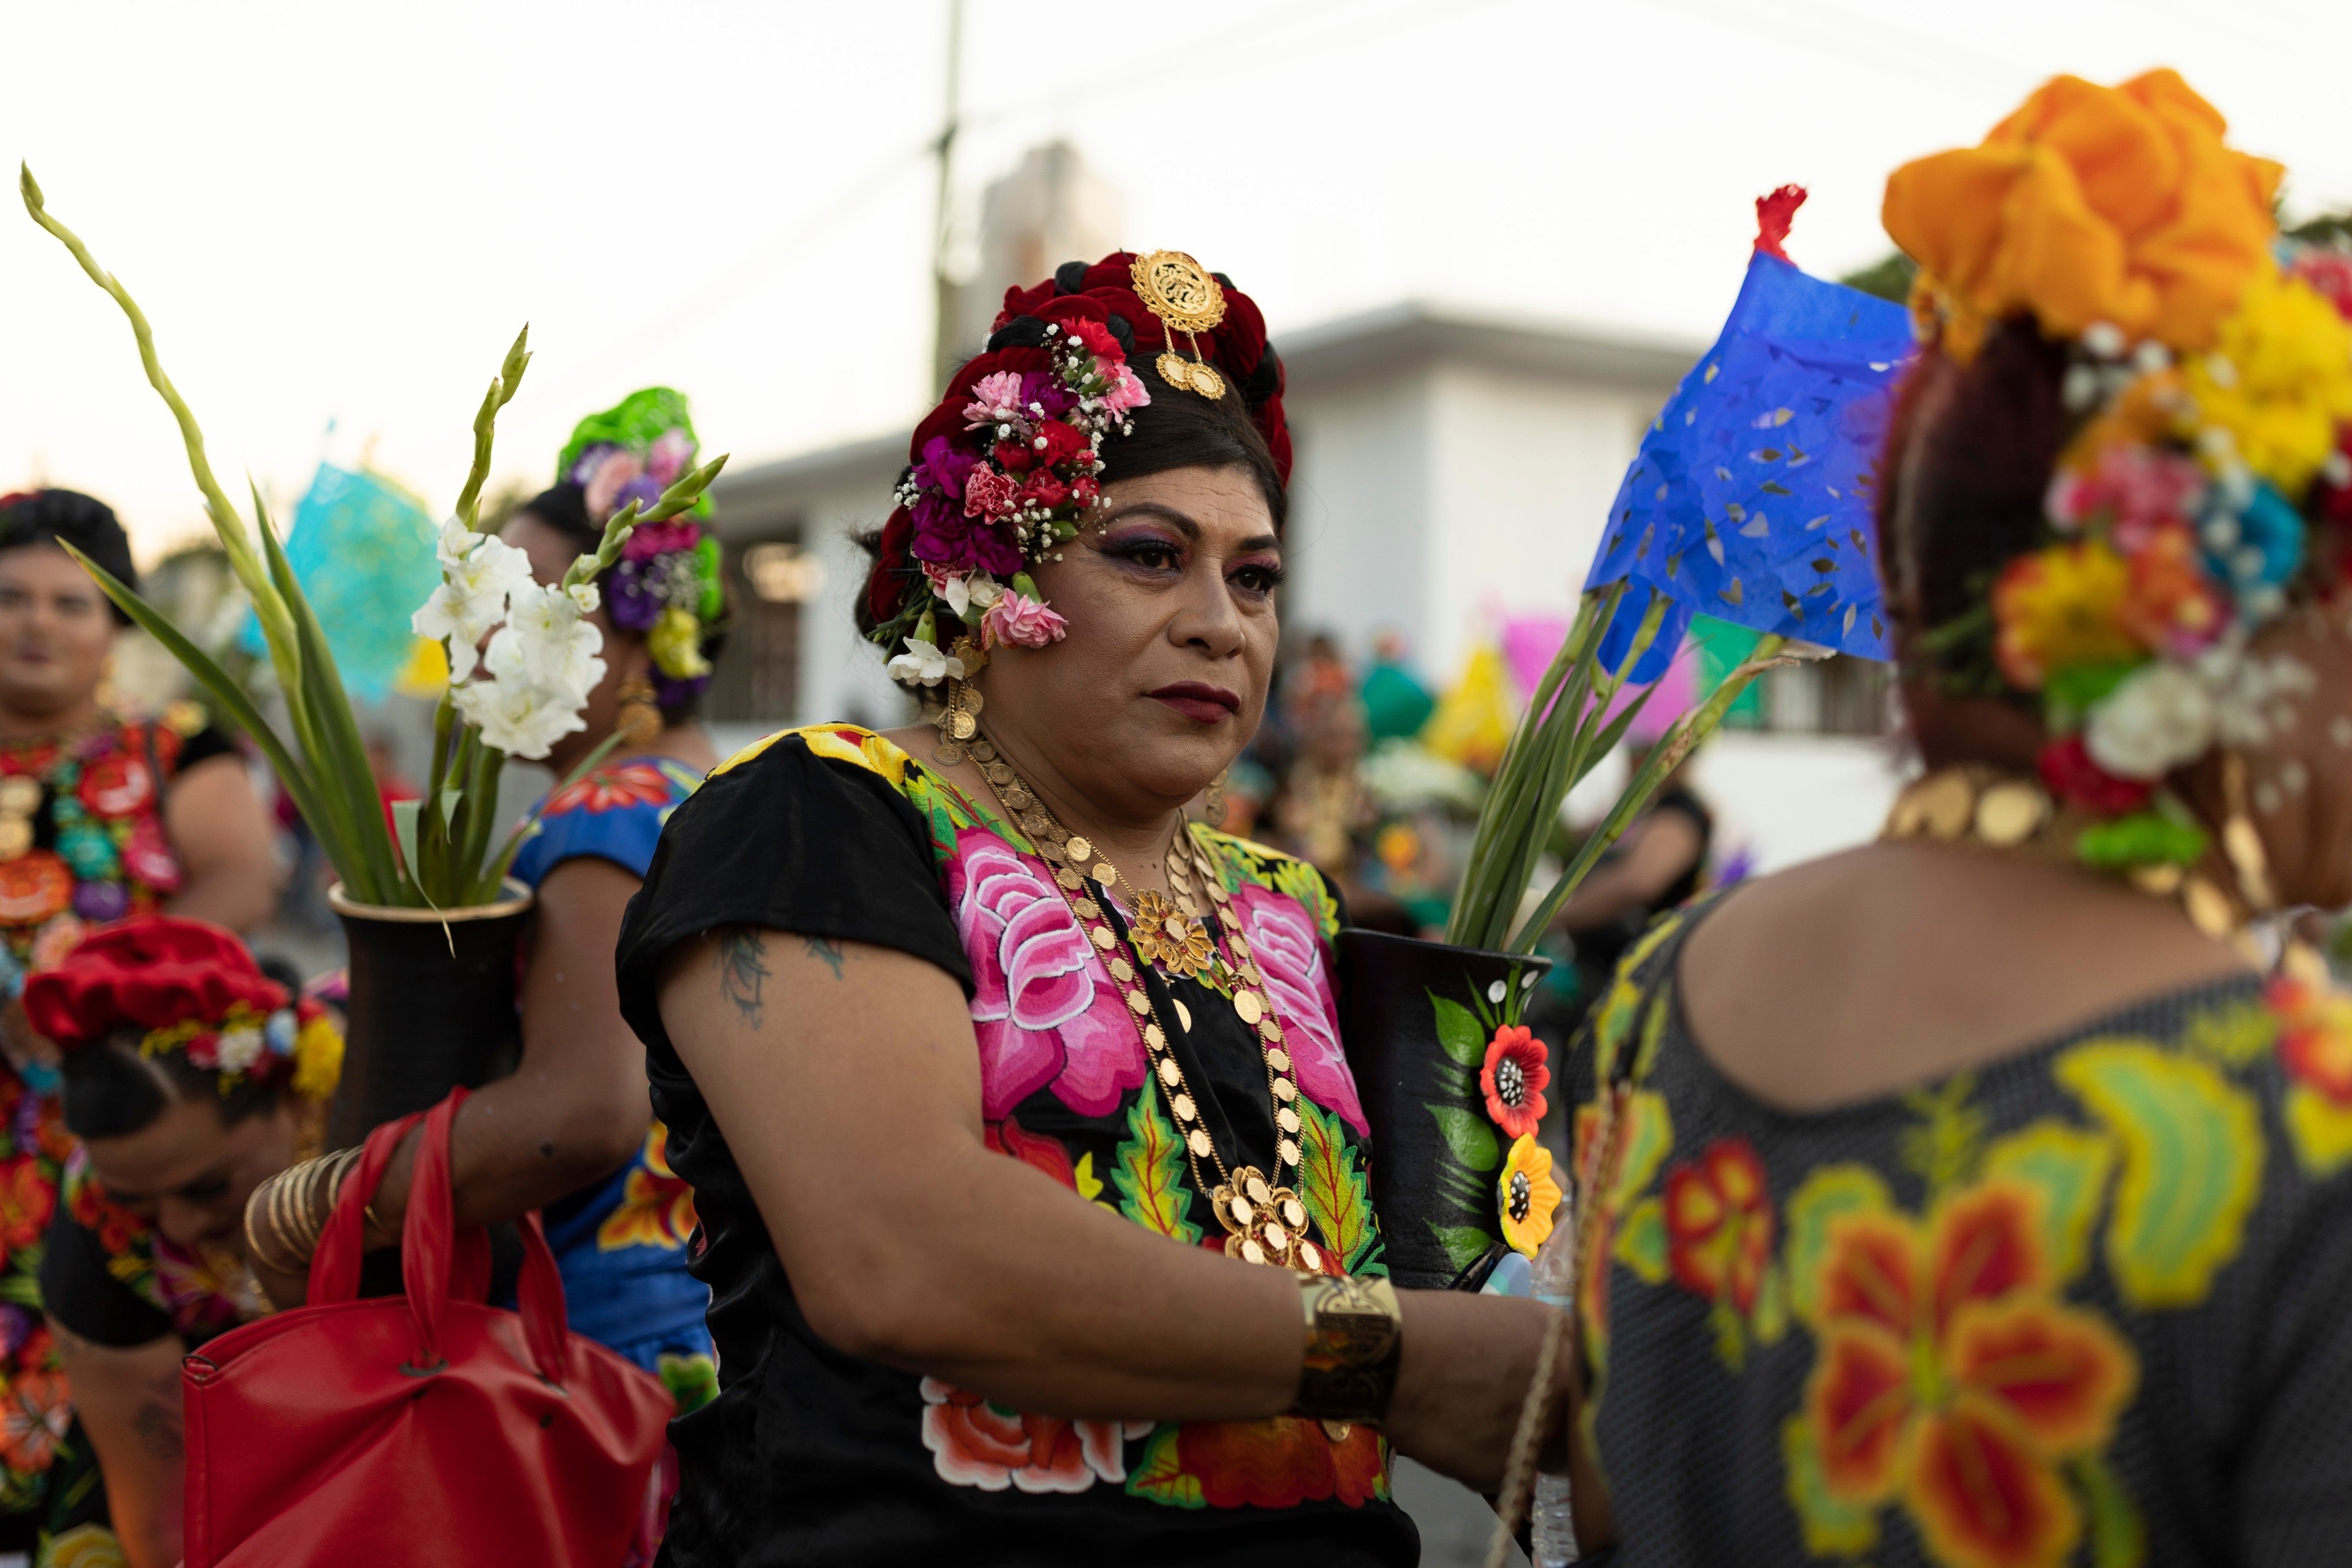  Regada de las Muxes, a parade on the streets of Mexico. The muxe (pronounced Moo-shay) are Zapotec people who view themselves as neither man nor woman, but instead a distinct “third gender”. Photo: Shutterstock